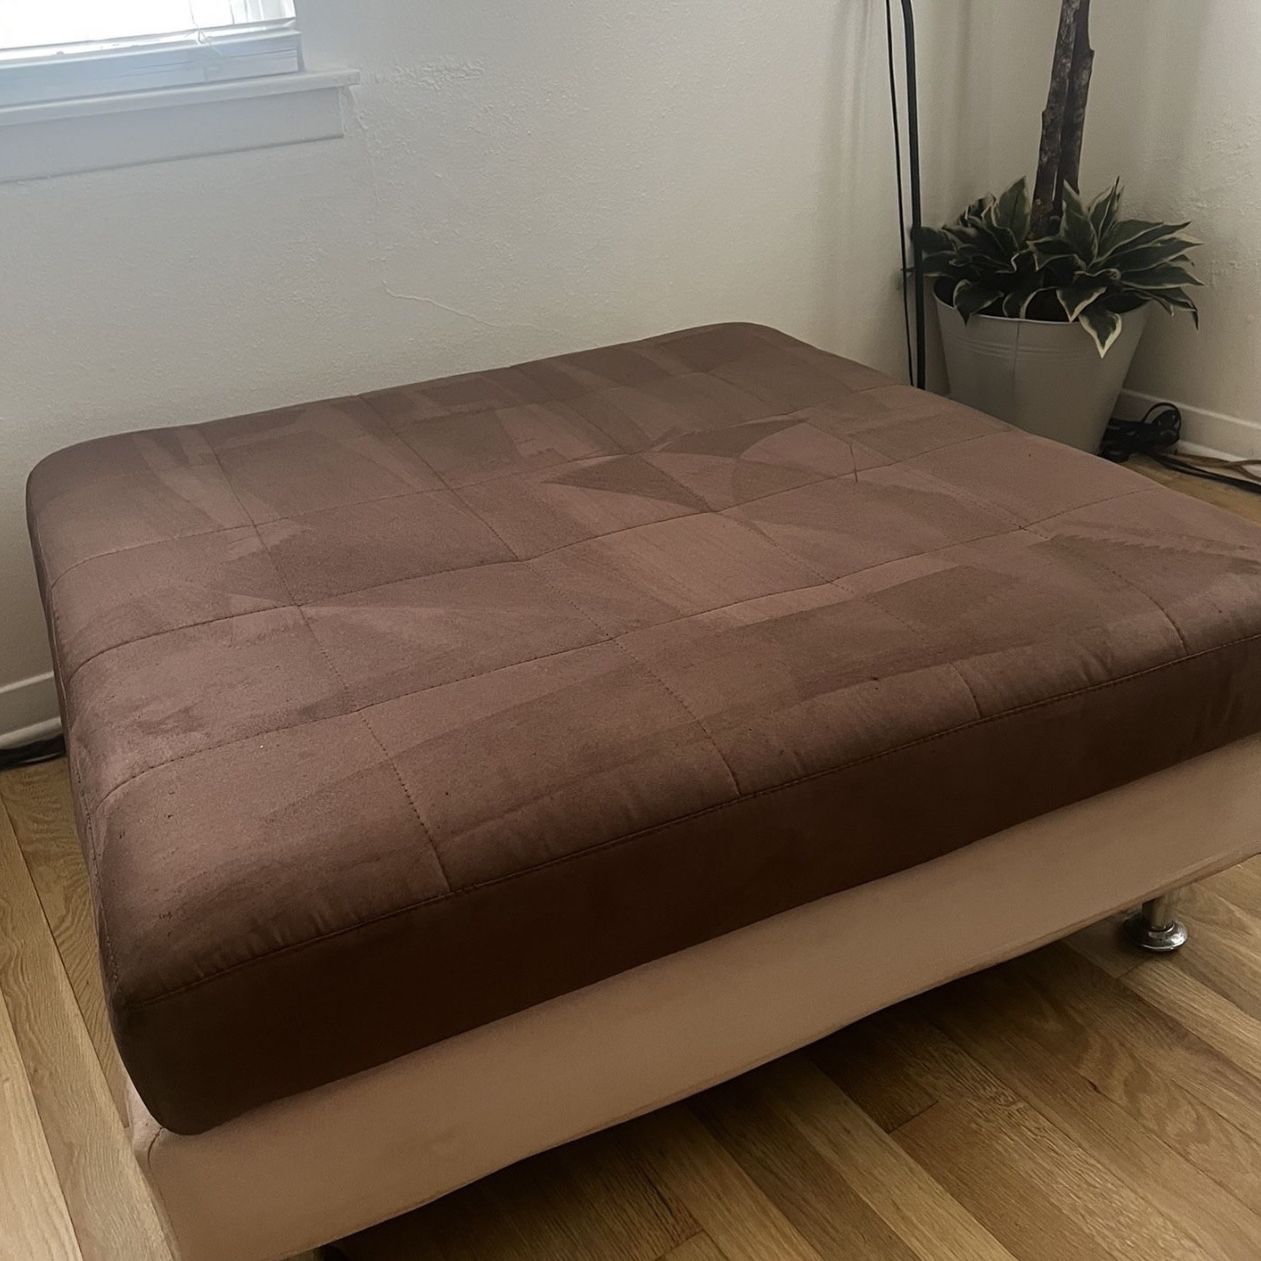 Barely Used Ottoman